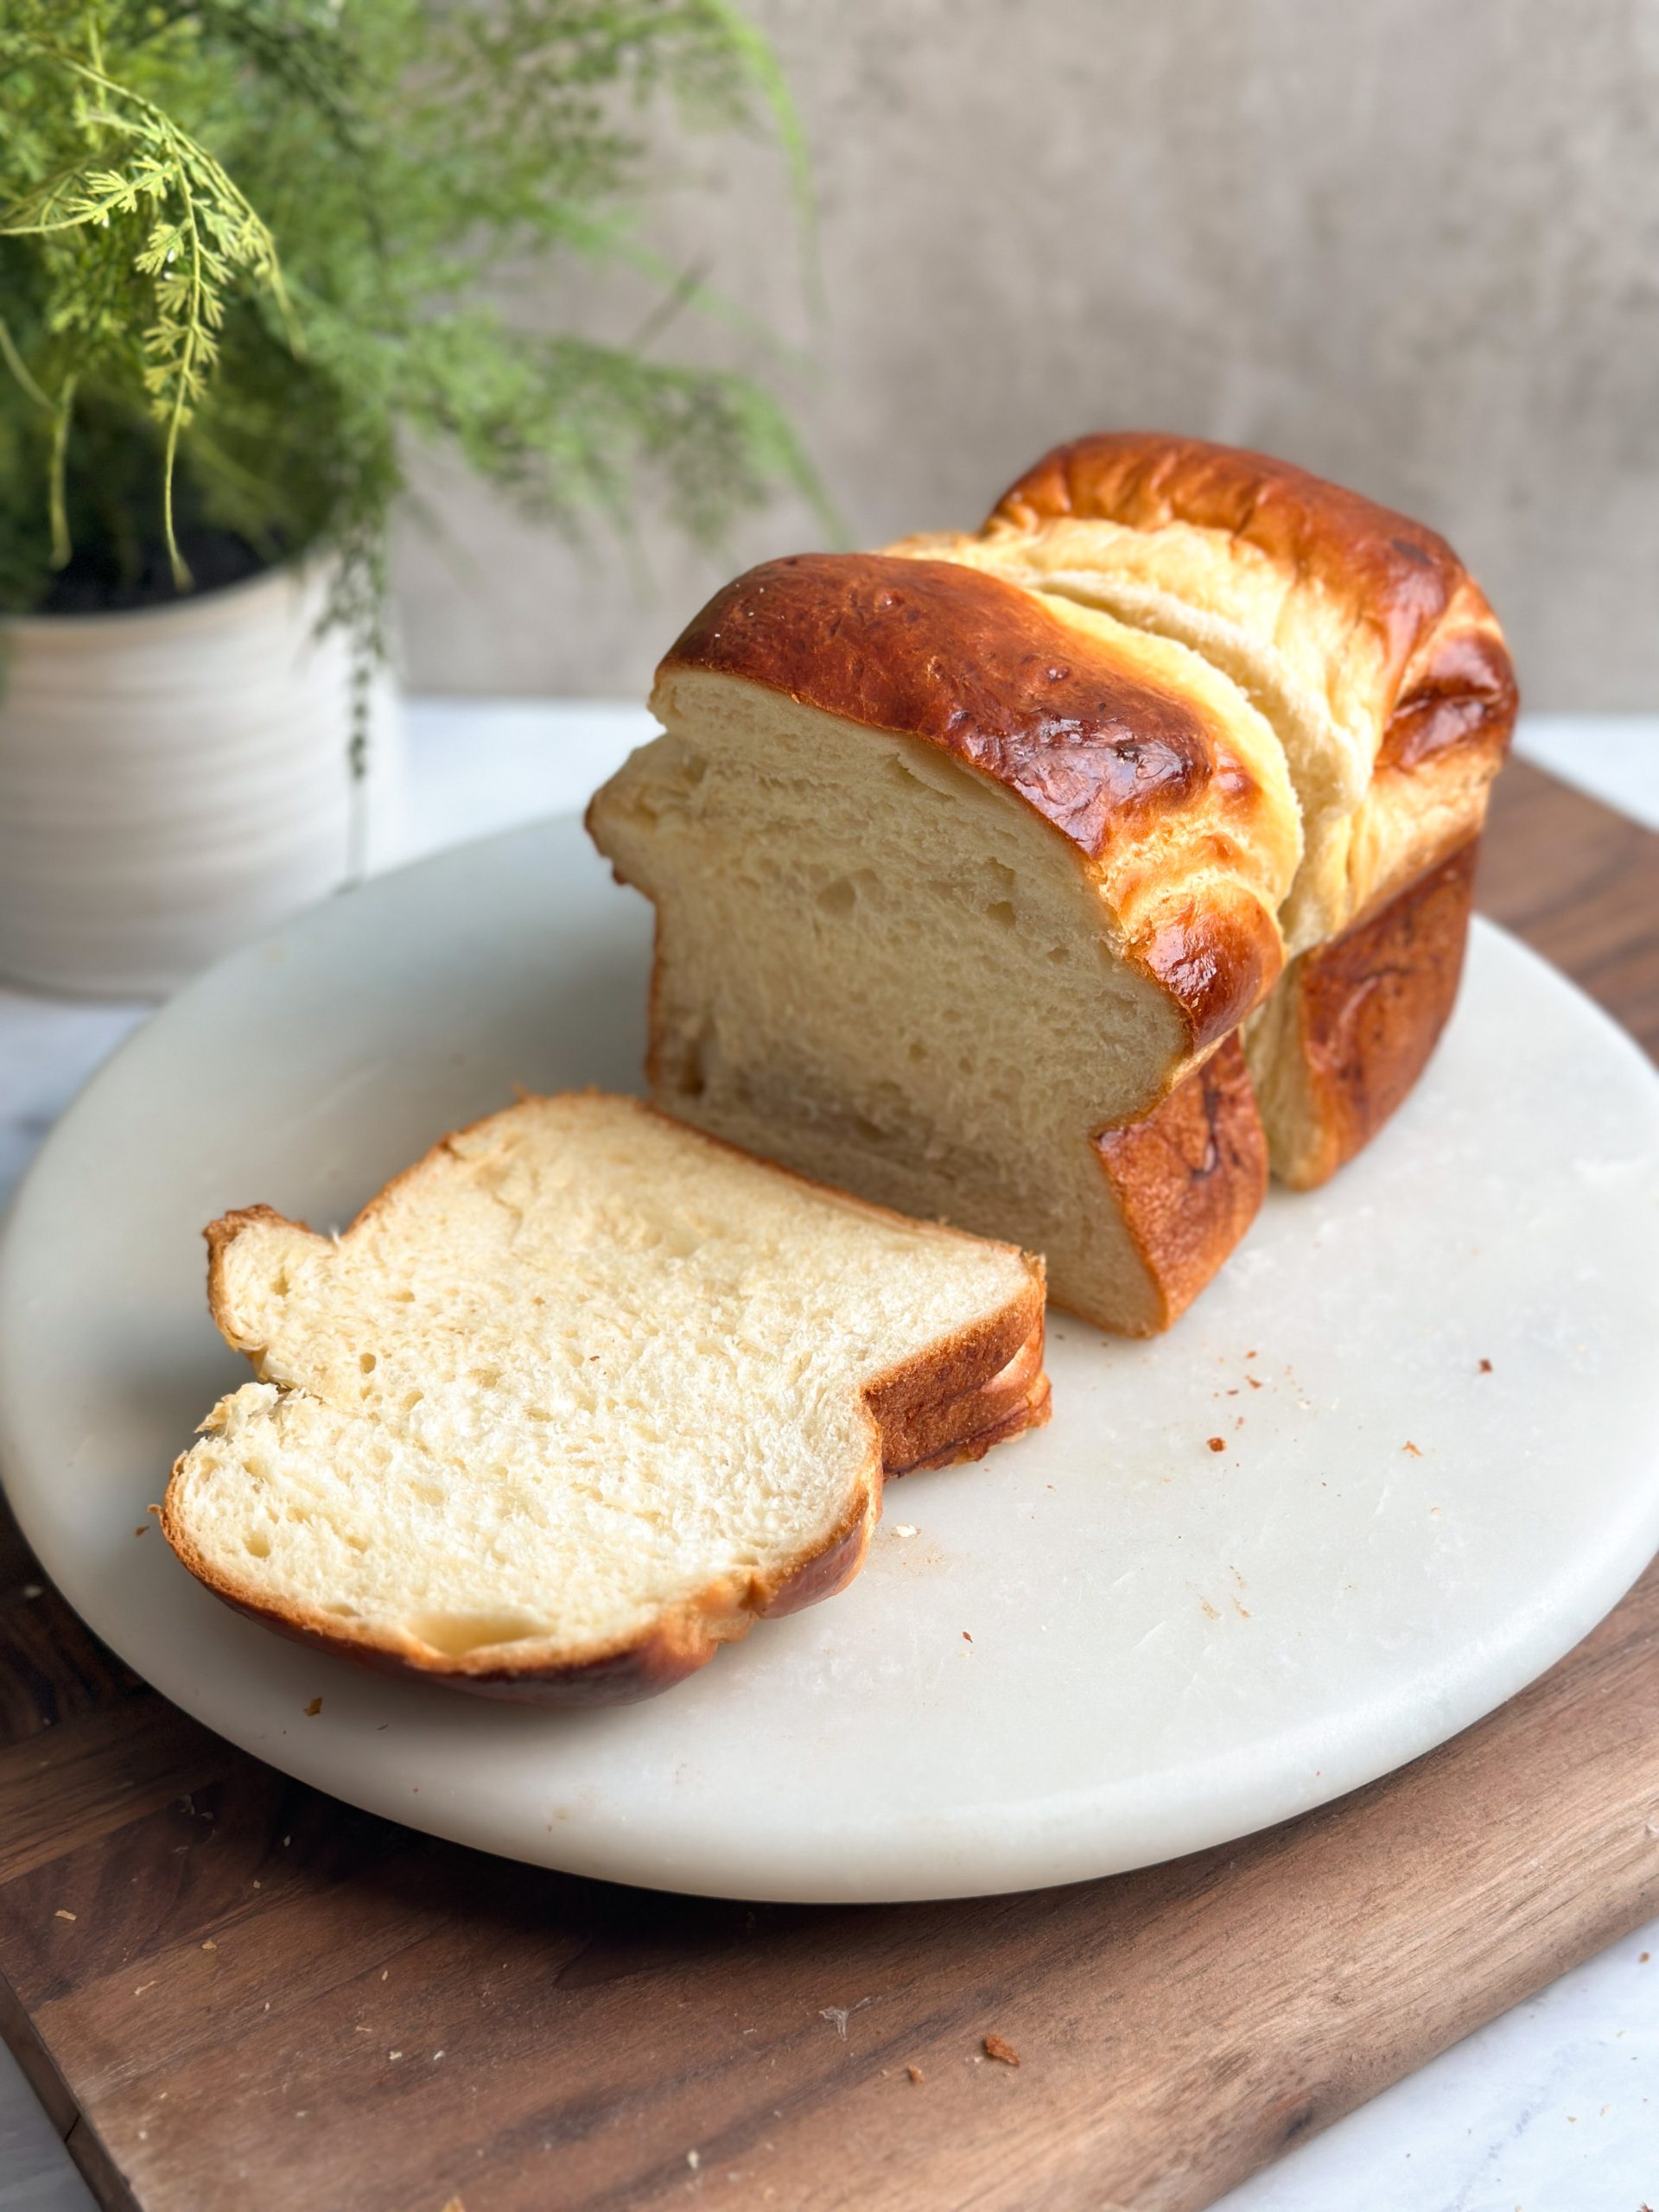 loaf of japanese milk bread sliced into thin slices showing a soft fluffy interior and golden shiny exterior